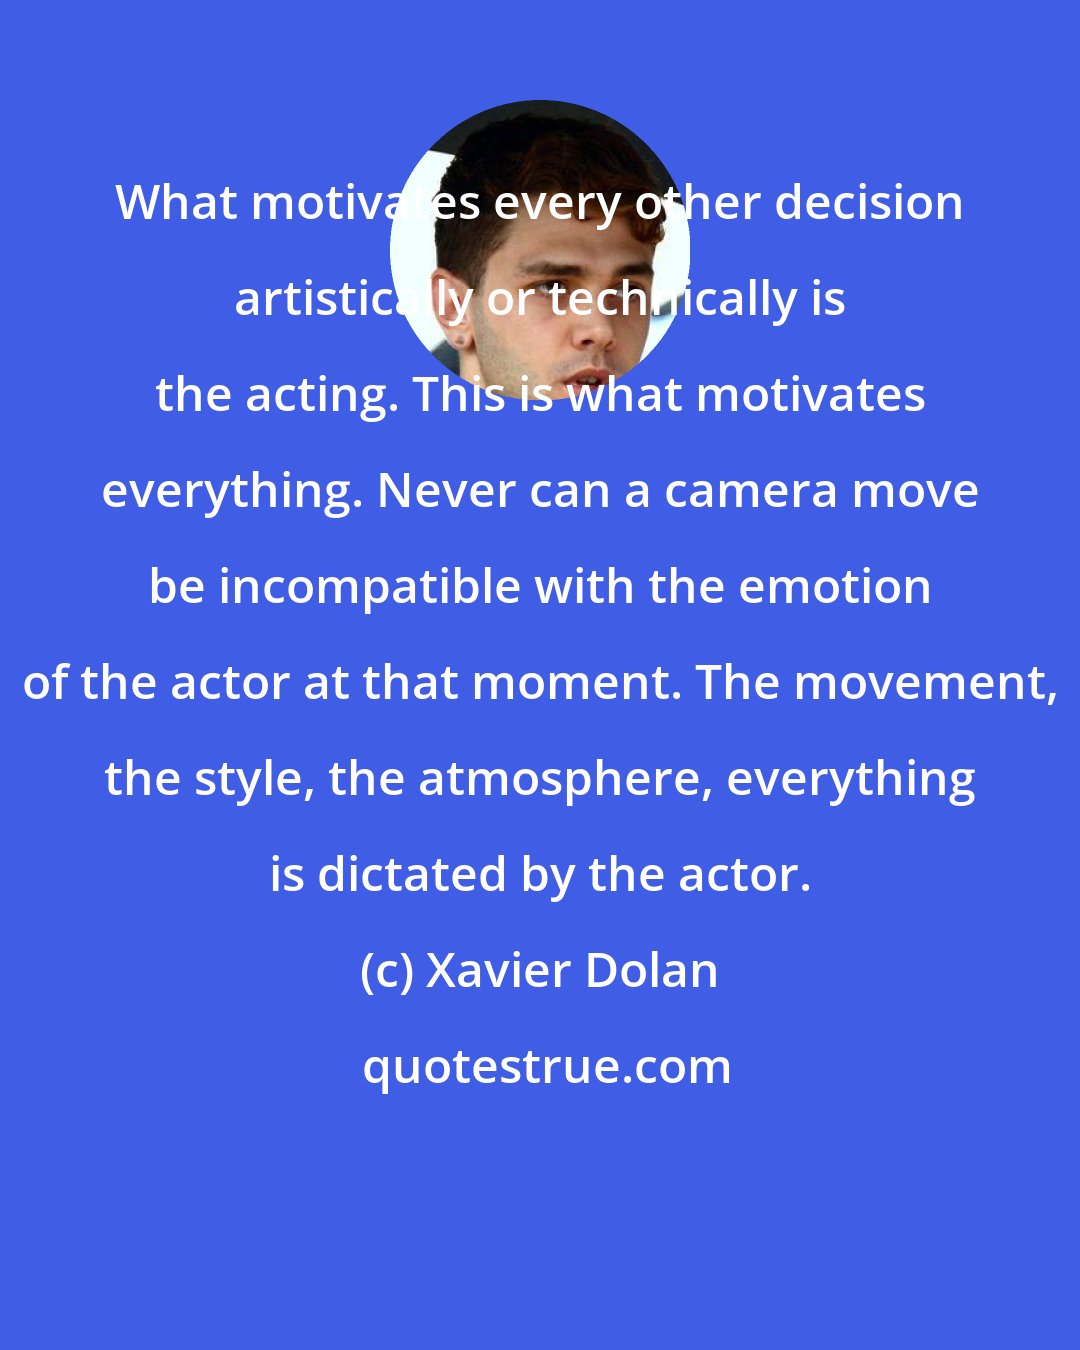 Xavier Dolan: What motivates every other decision artistically or technically is the acting. This is what motivates everything. Never can a camera move be incompatible with the emotion of the actor at that moment. The movement, the style, the atmosphere, everything is dictated by the actor.